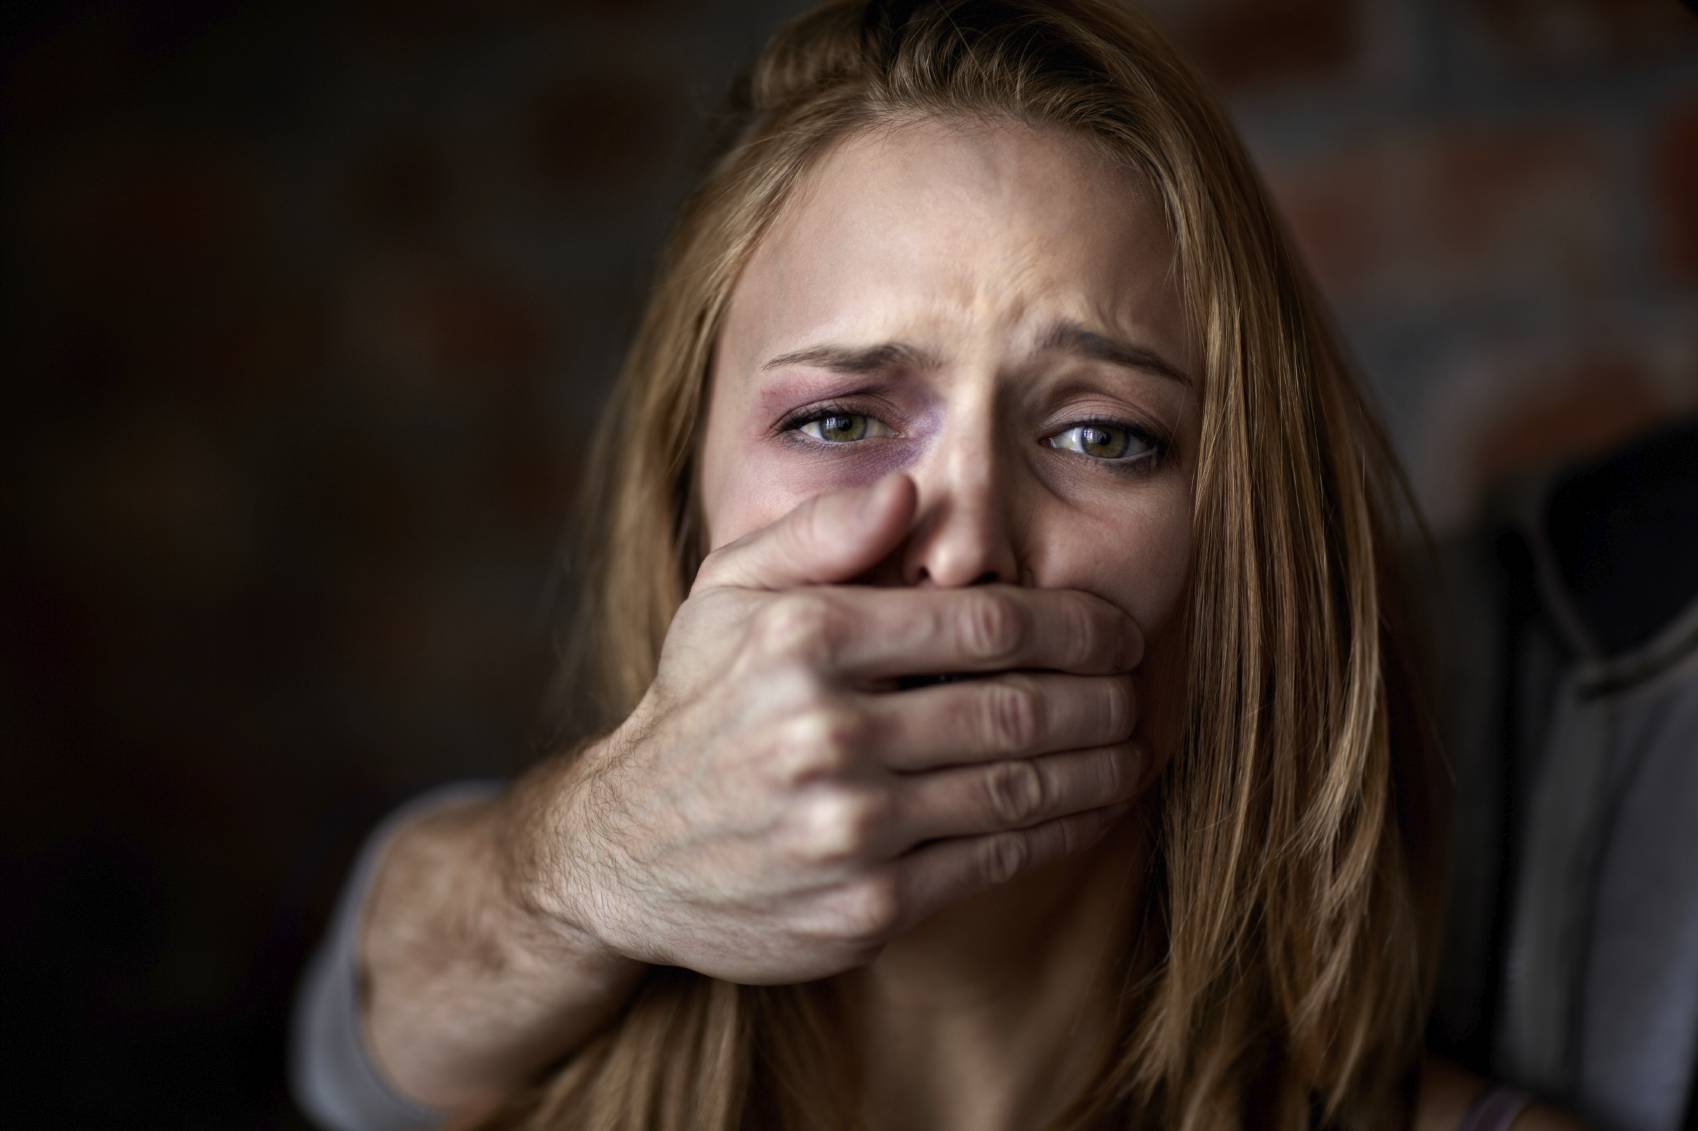 Abused young woman being silenced by her abuser